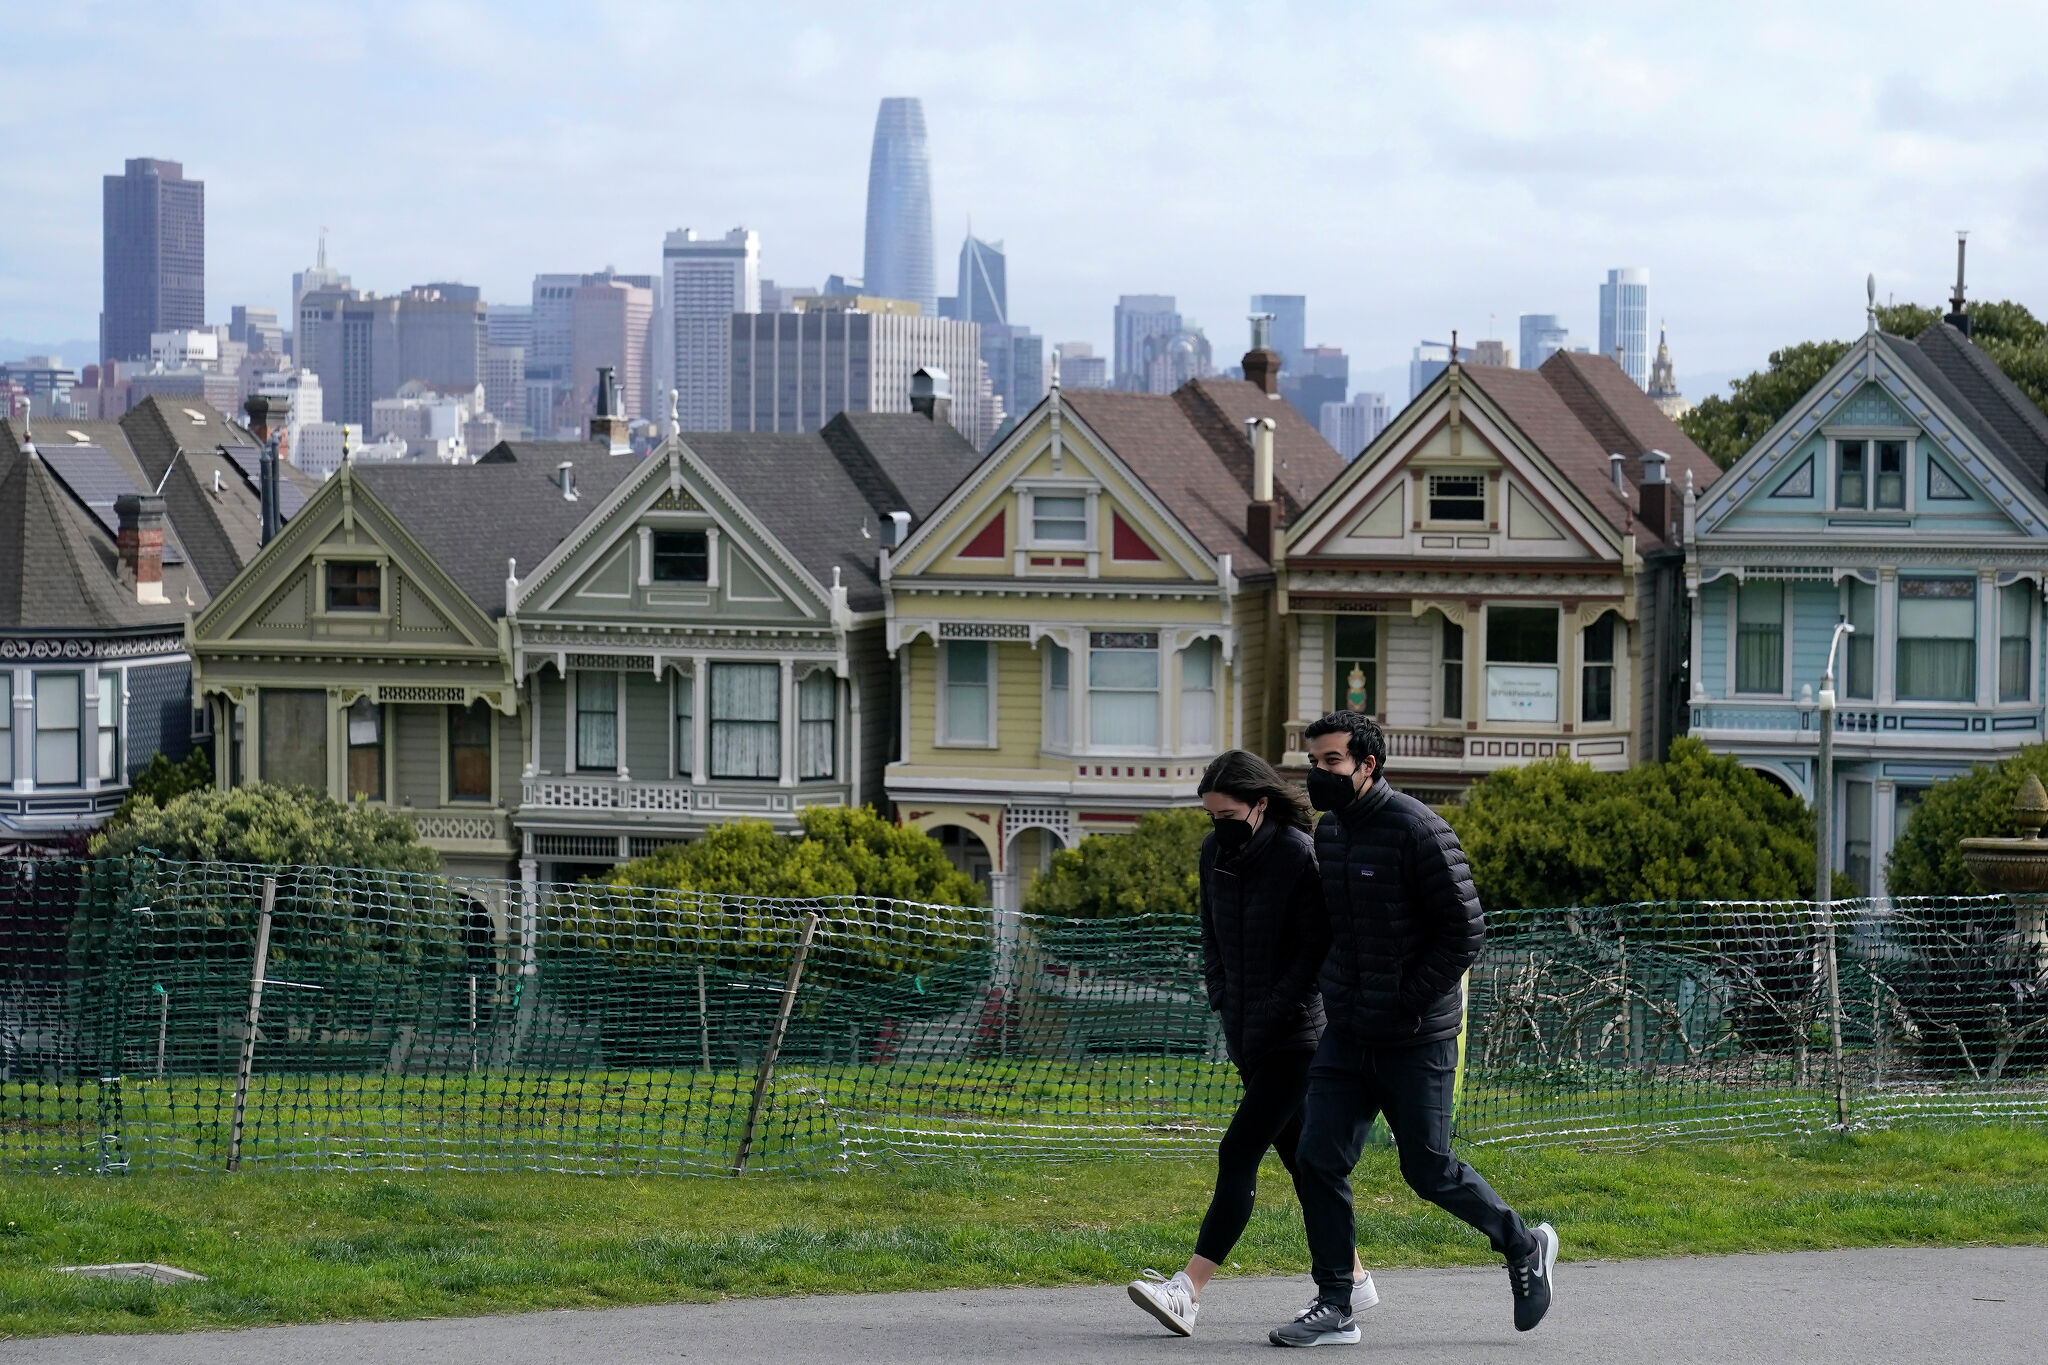 COVID is surging again. Why the San Francisco Bay Area isn’t doing mandates. – SFGATE